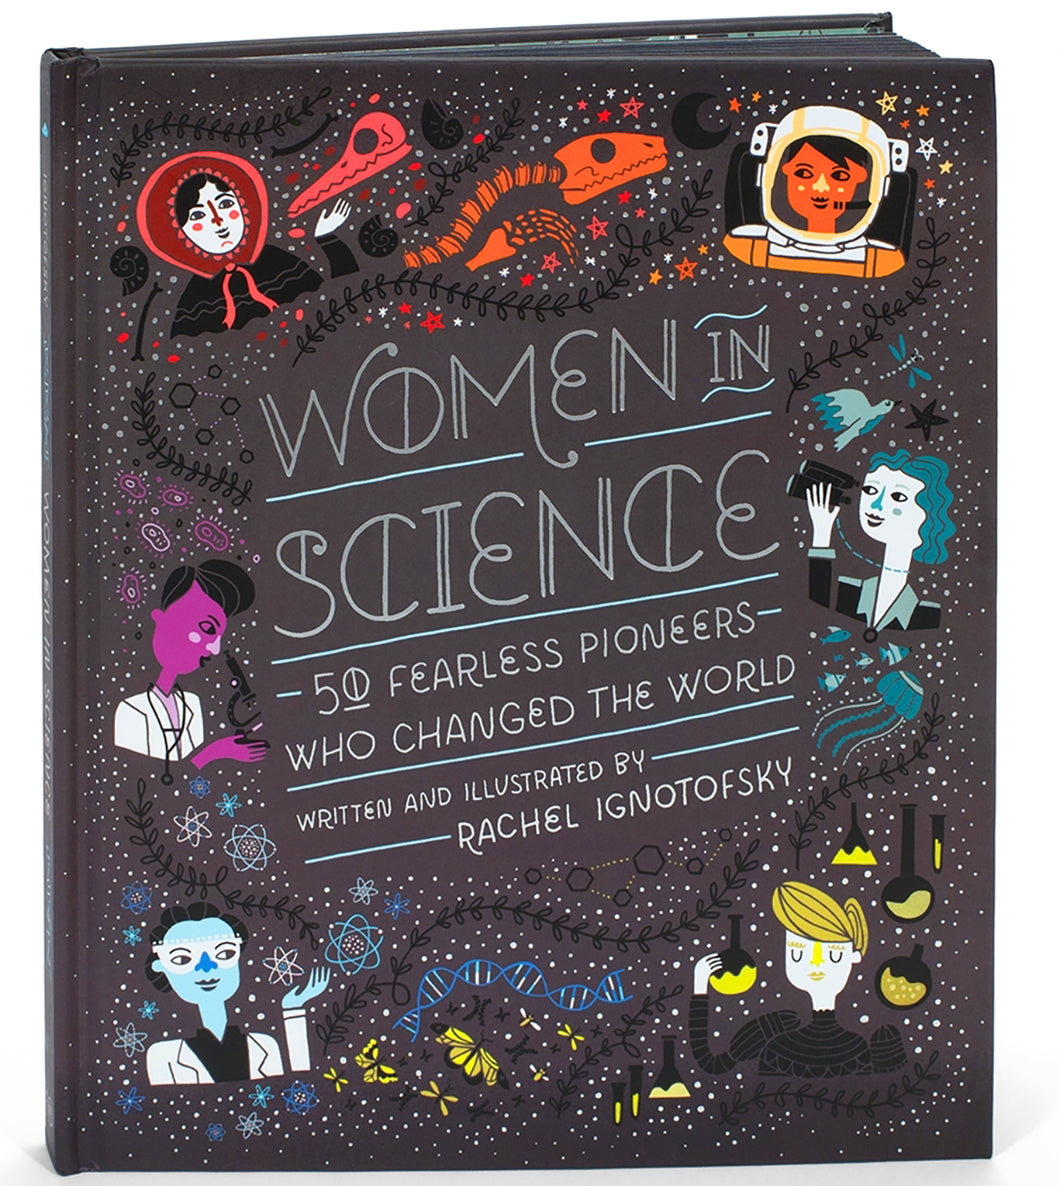 Women in Science: 50 Fearless Pioneers Who Changed the World by Rachel Ignotofsky / Board Book - NEW BOOK